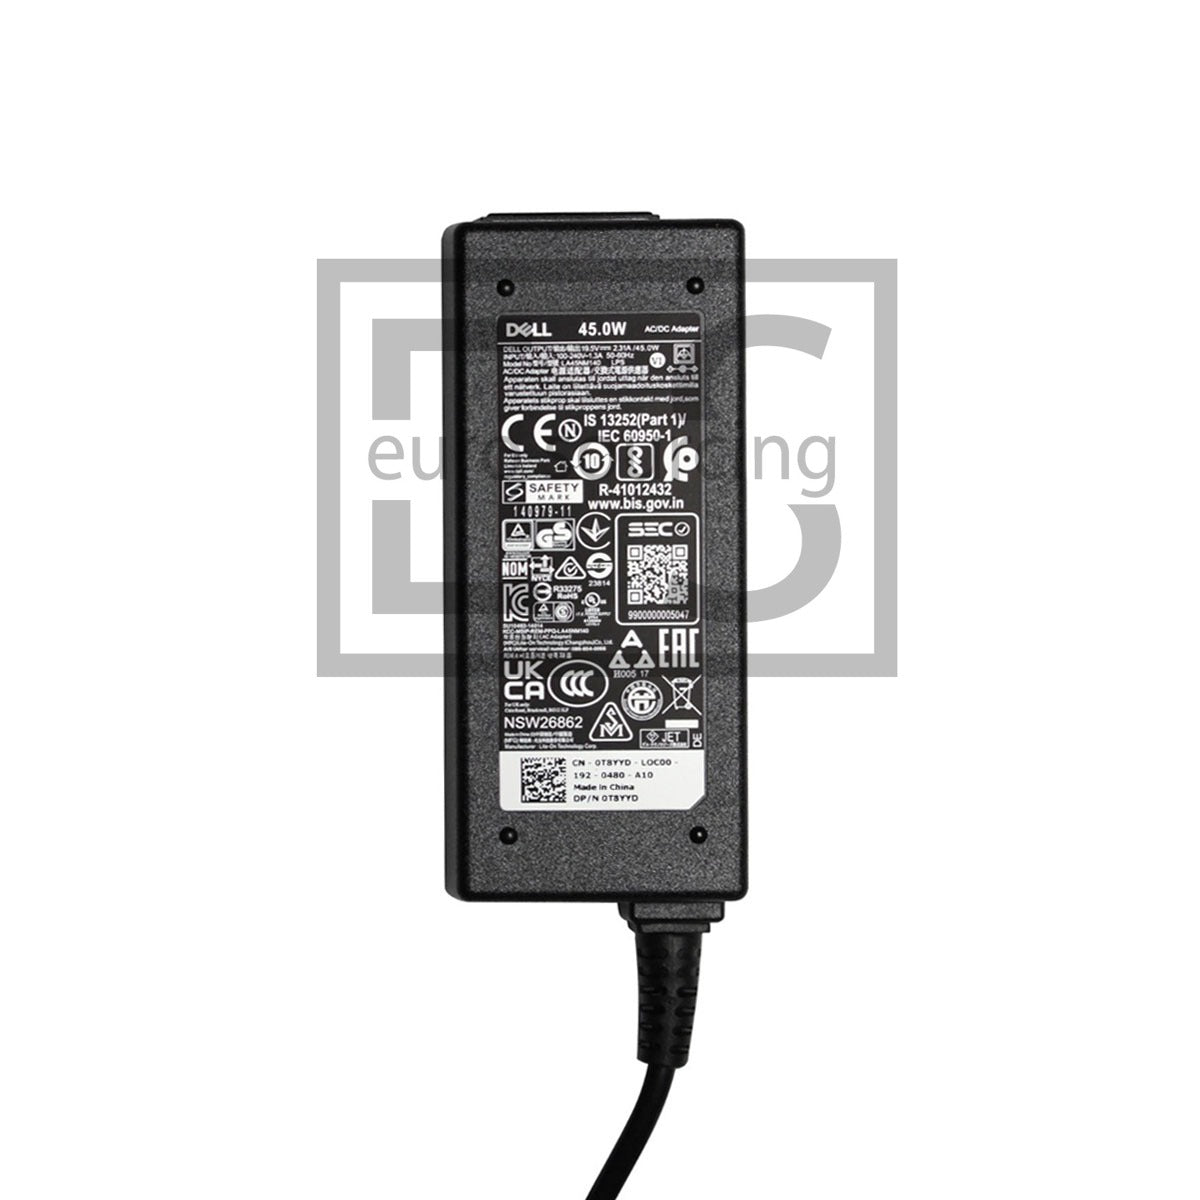 Genuine DELL 19.5V 2.31A DELC231 *ROUND* TYPE DELL BRAND 45W AC ADAPTER 4.5MM x 3.0MM Compatible With DELL INSPIRON 17 3781